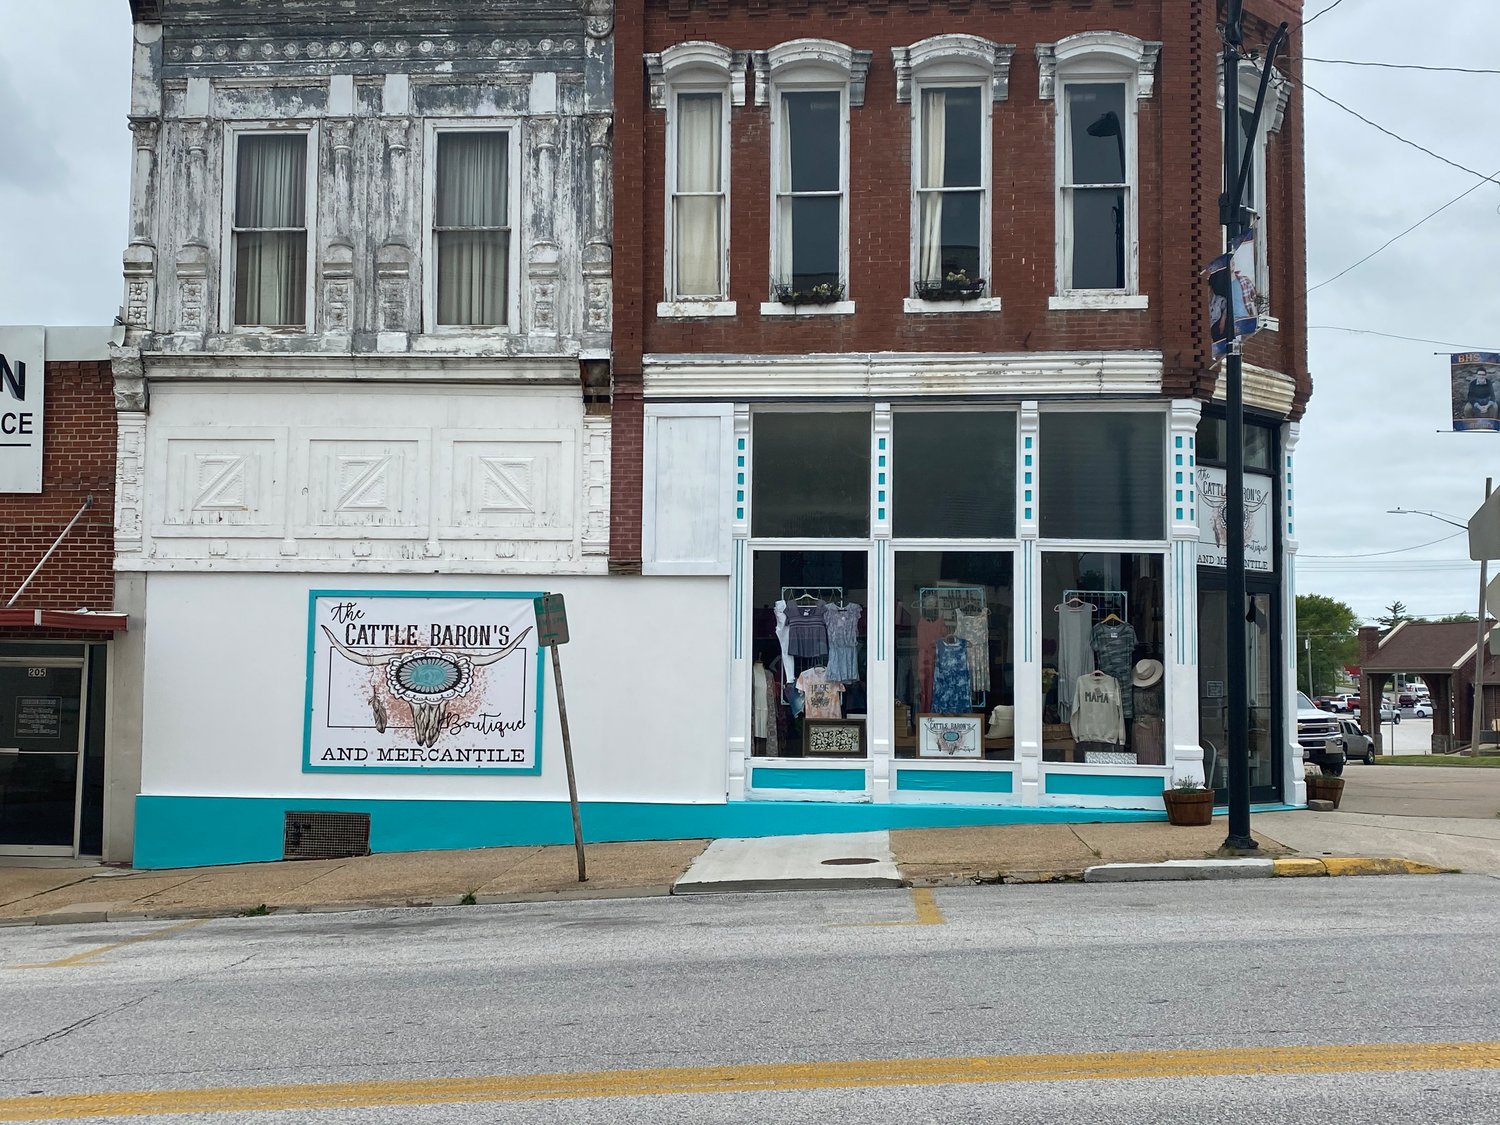 A second shop for The Cattle Baron’s Boutique is open at 201 S. Main St. in Bolivar.